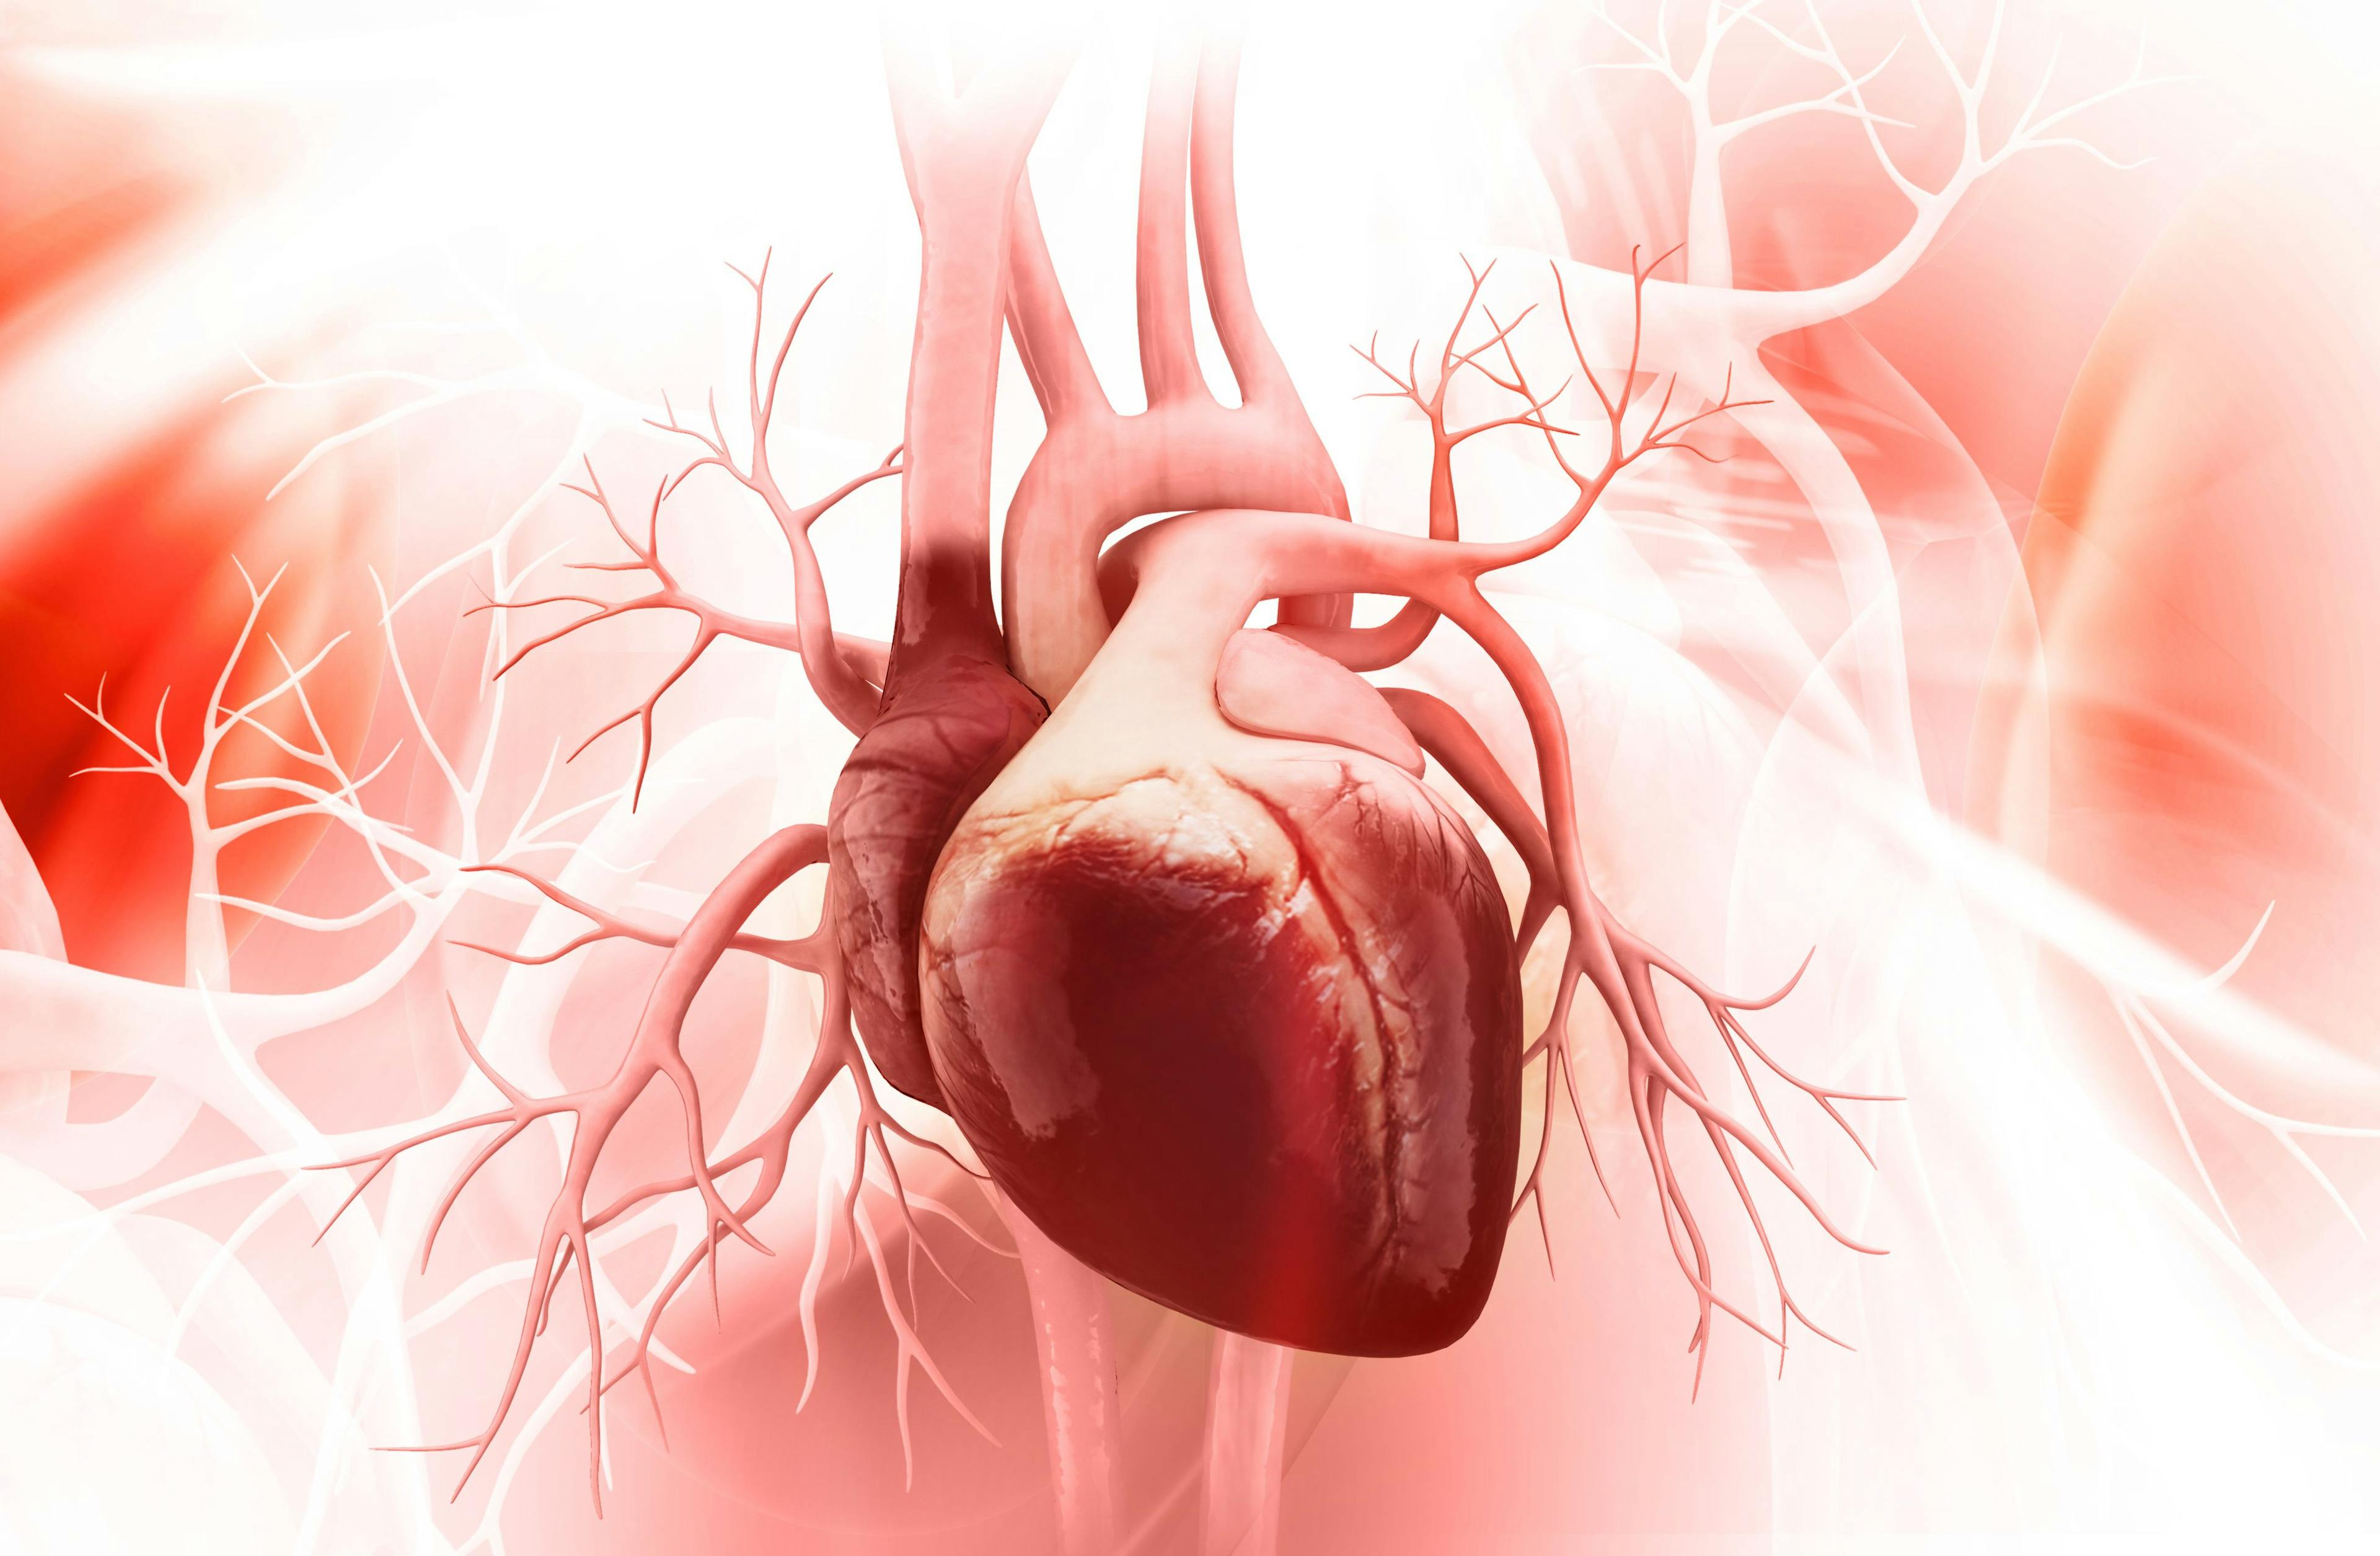 REDUCE LAP-HF II: Atrial Shunt Trial in HFpEF Returns Mixed Results